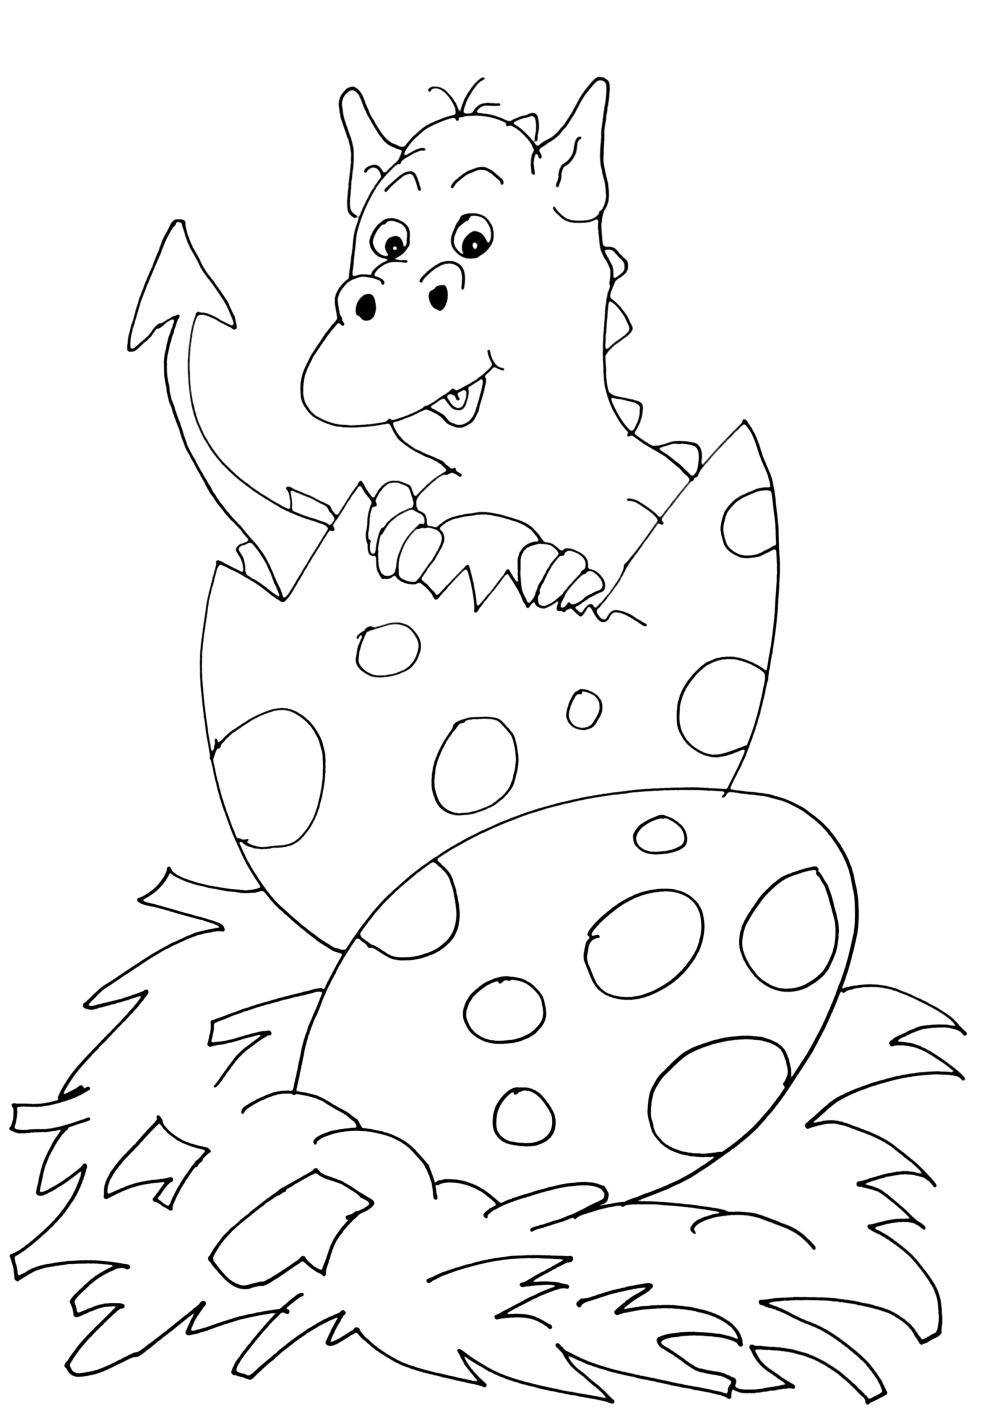 Knights and dragons for children - Knights And Dragons Kids Coloring Pages